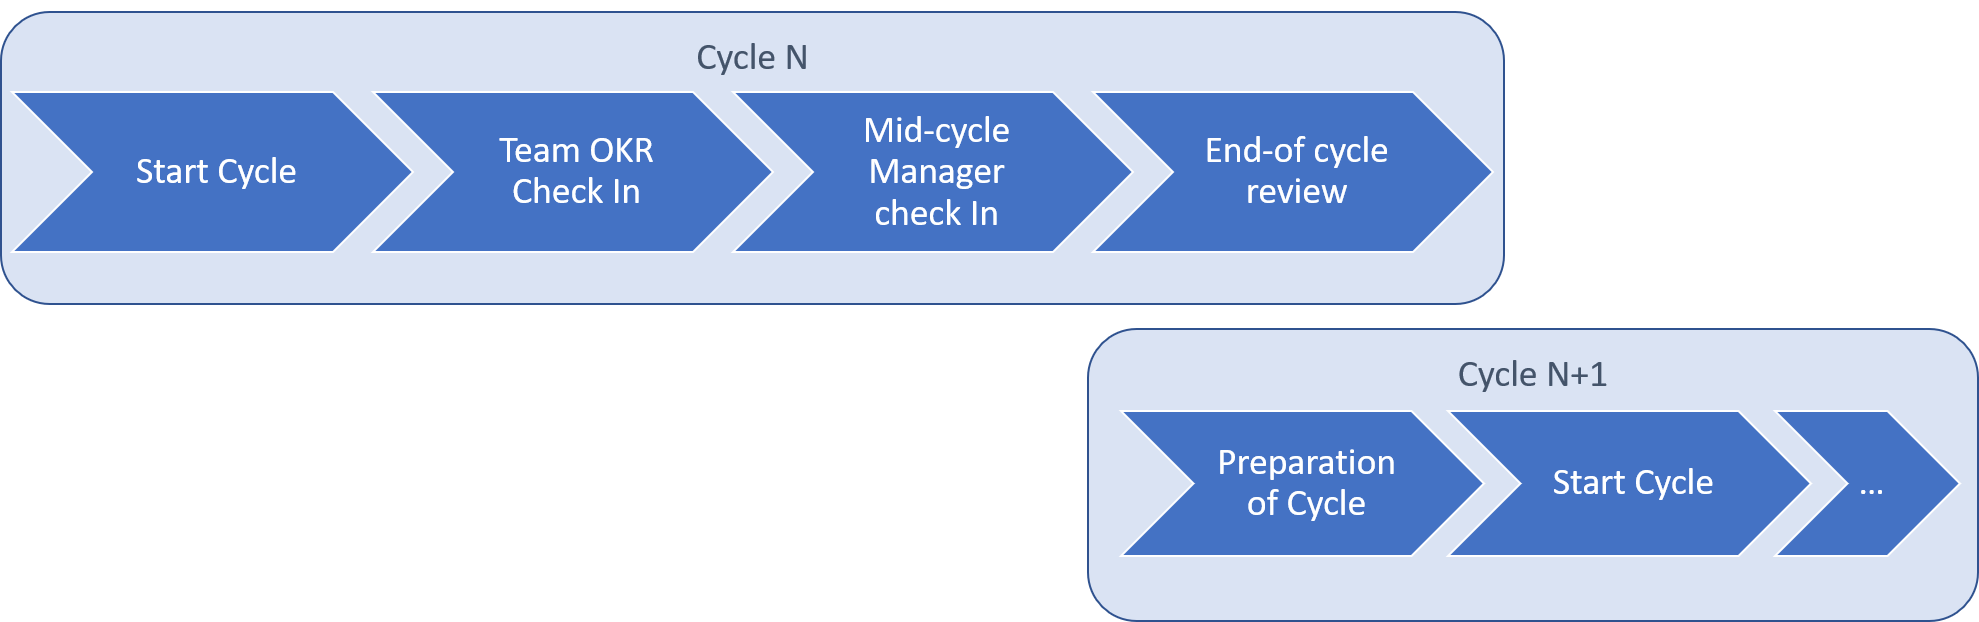 Typical OKR Cycle